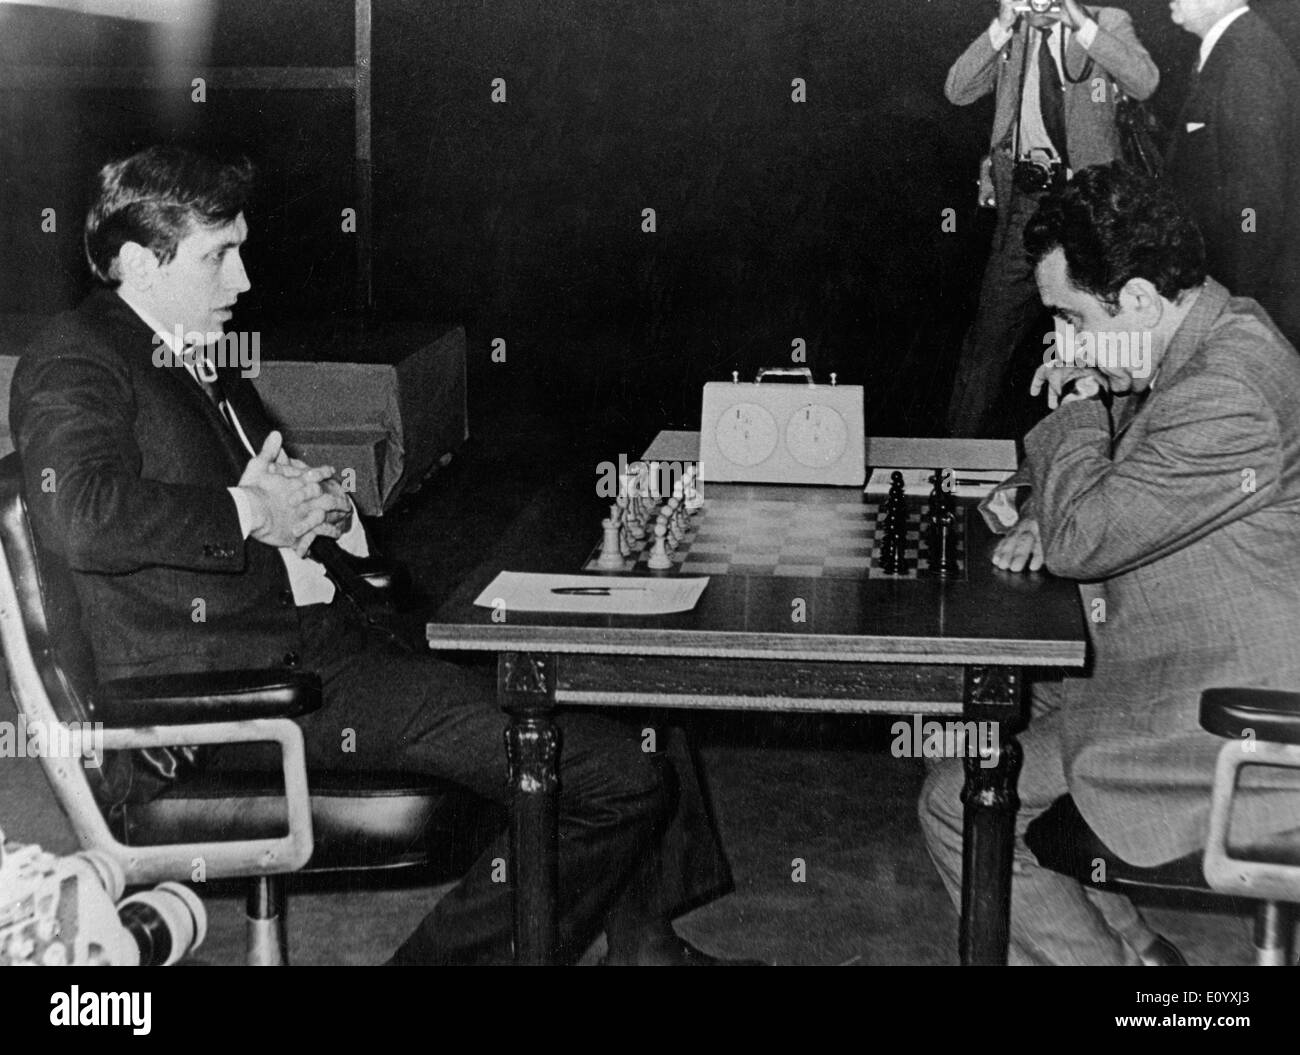 Former chess champion Bobby Fischer has died at 64, spokesman says